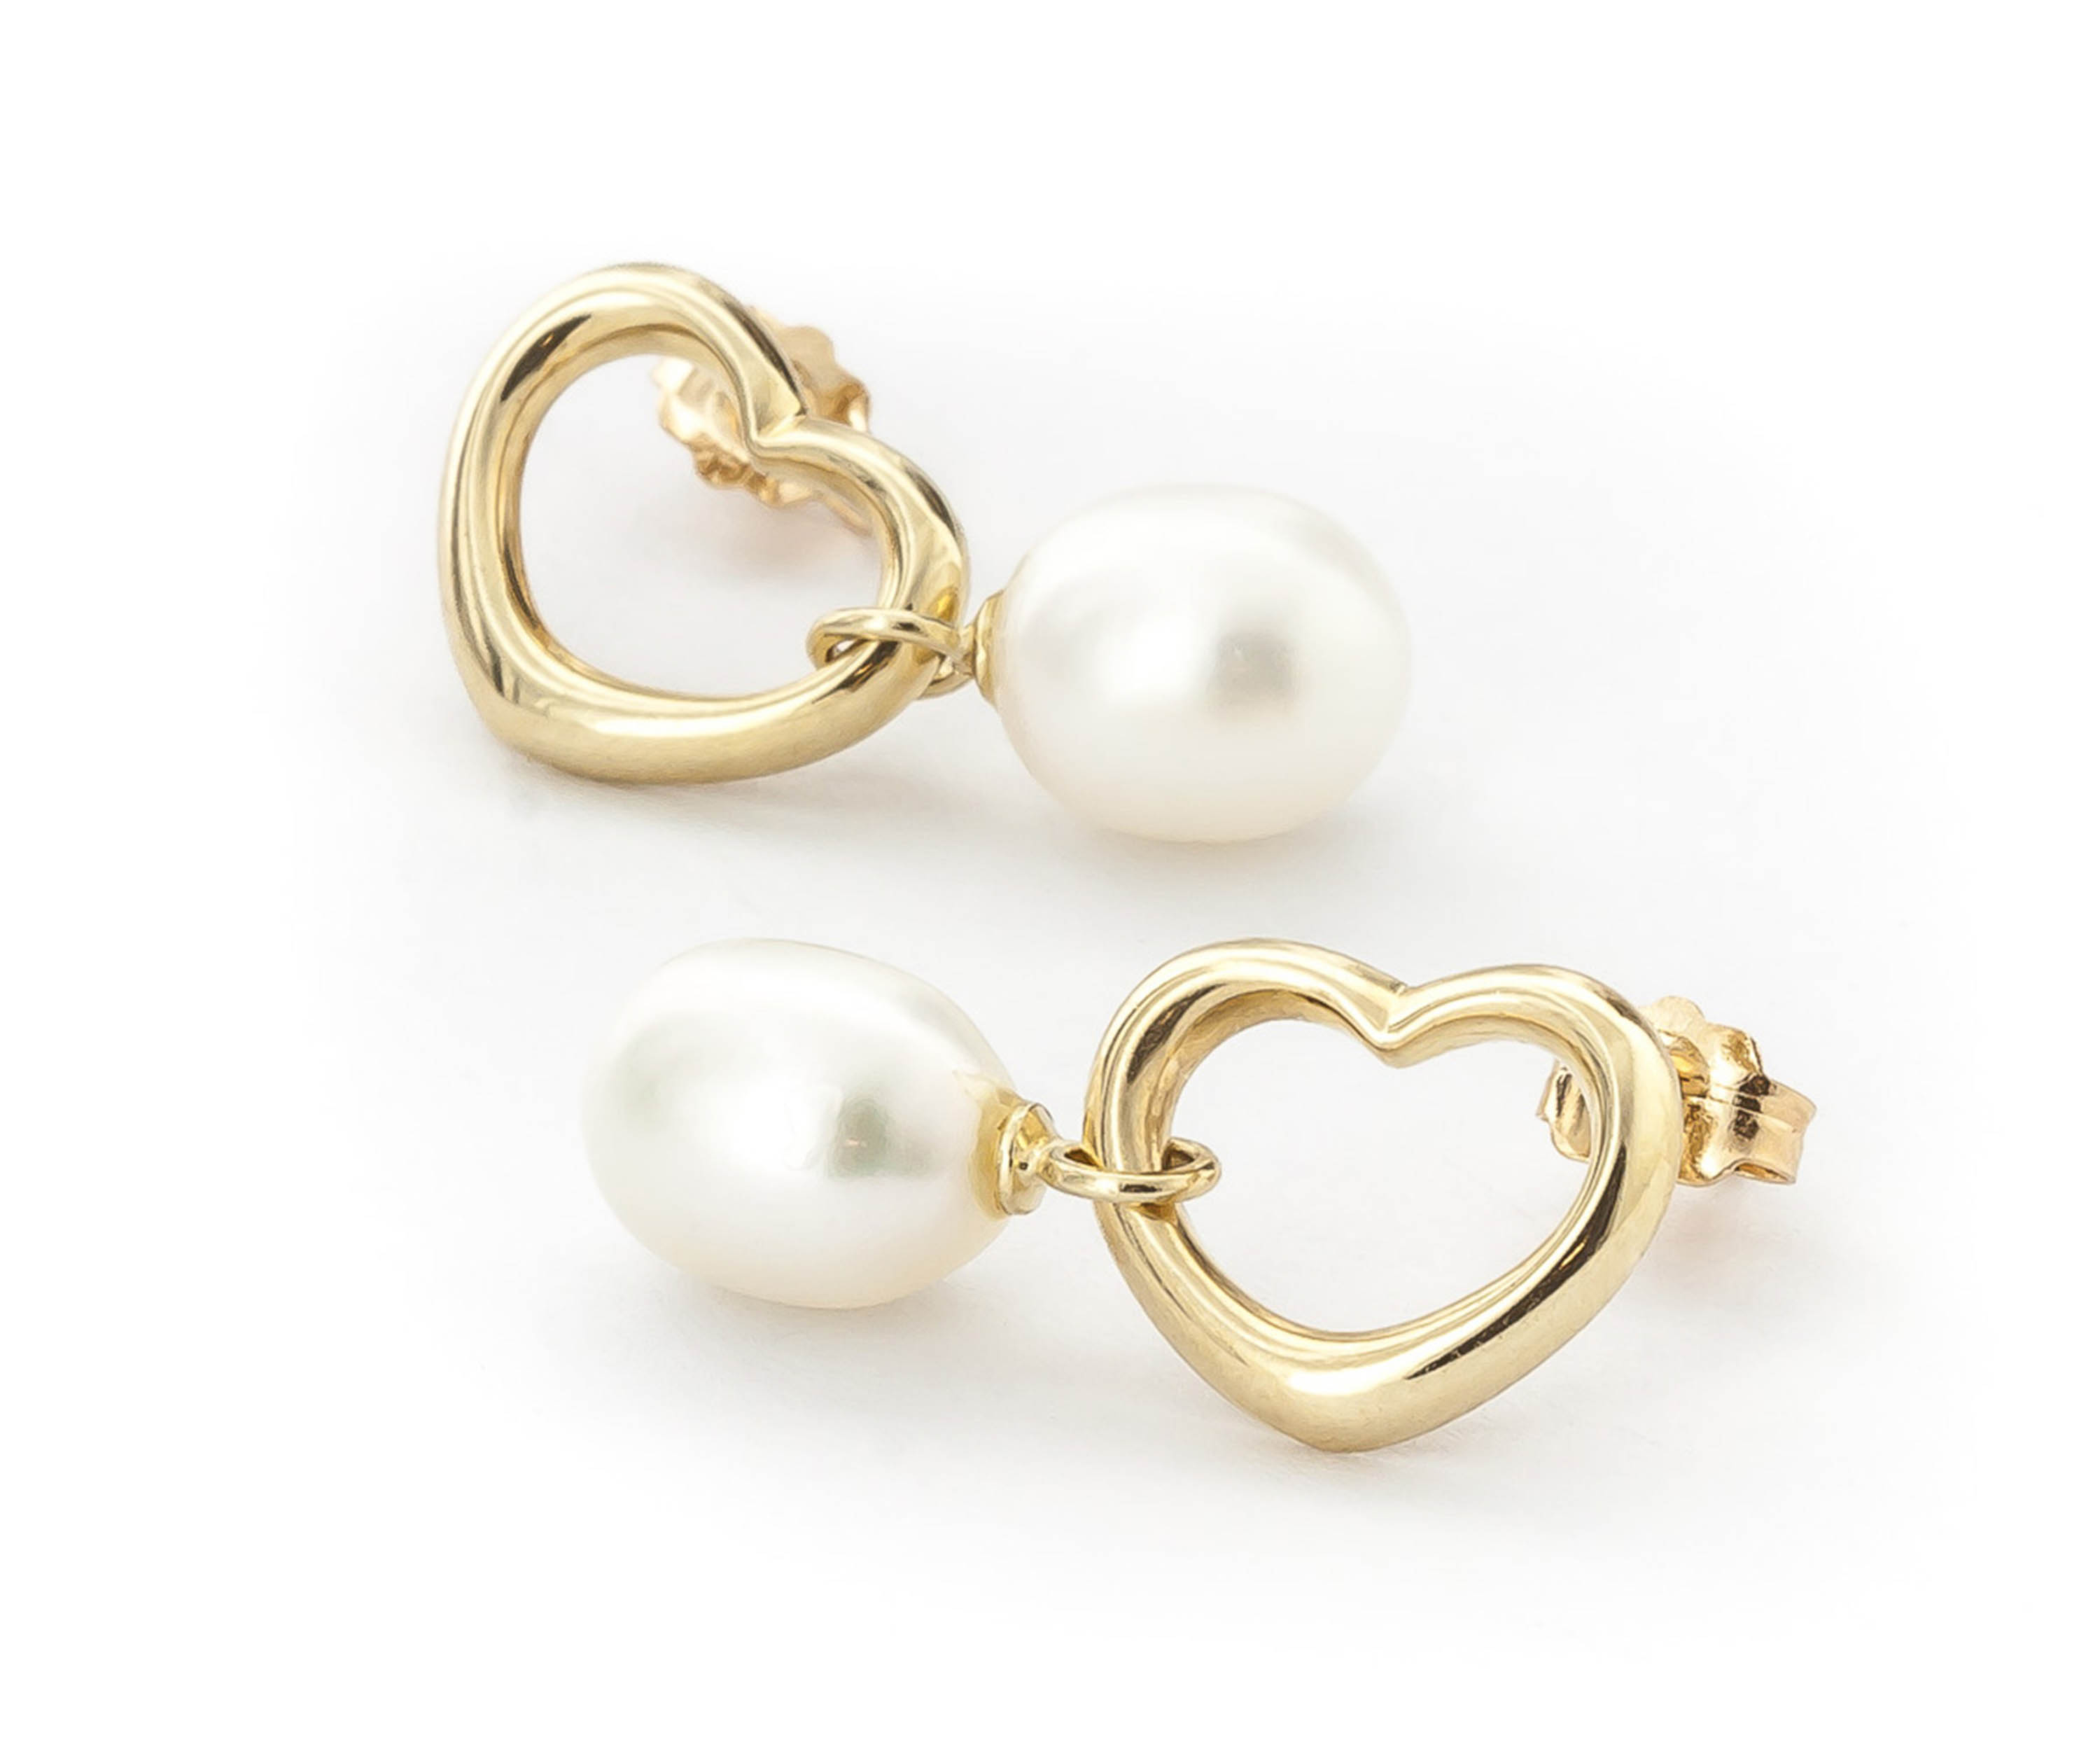 Galaxy Gold 8 Carat 14k Solid Gold Open Heart Stud Earrings with Dangling Freshwater-cultured Pearls - image 5 of 5